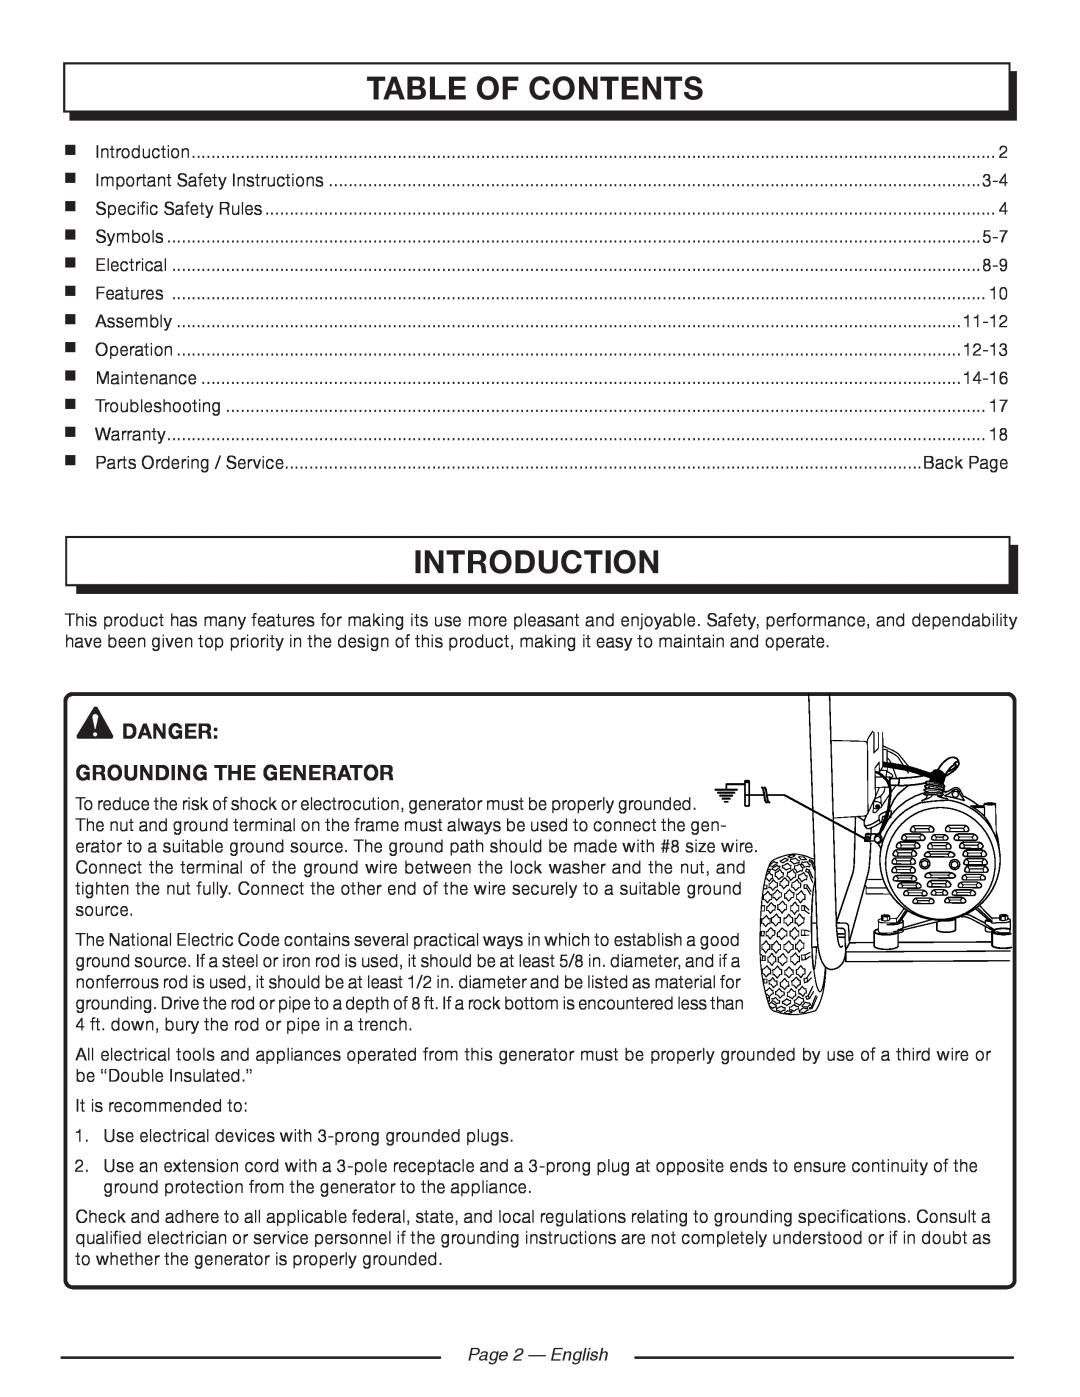 Homelite HGCA5700 manuel dutilisation Introduction, Table Of Contents, danger Grounding the Generator, Page 2 — English 